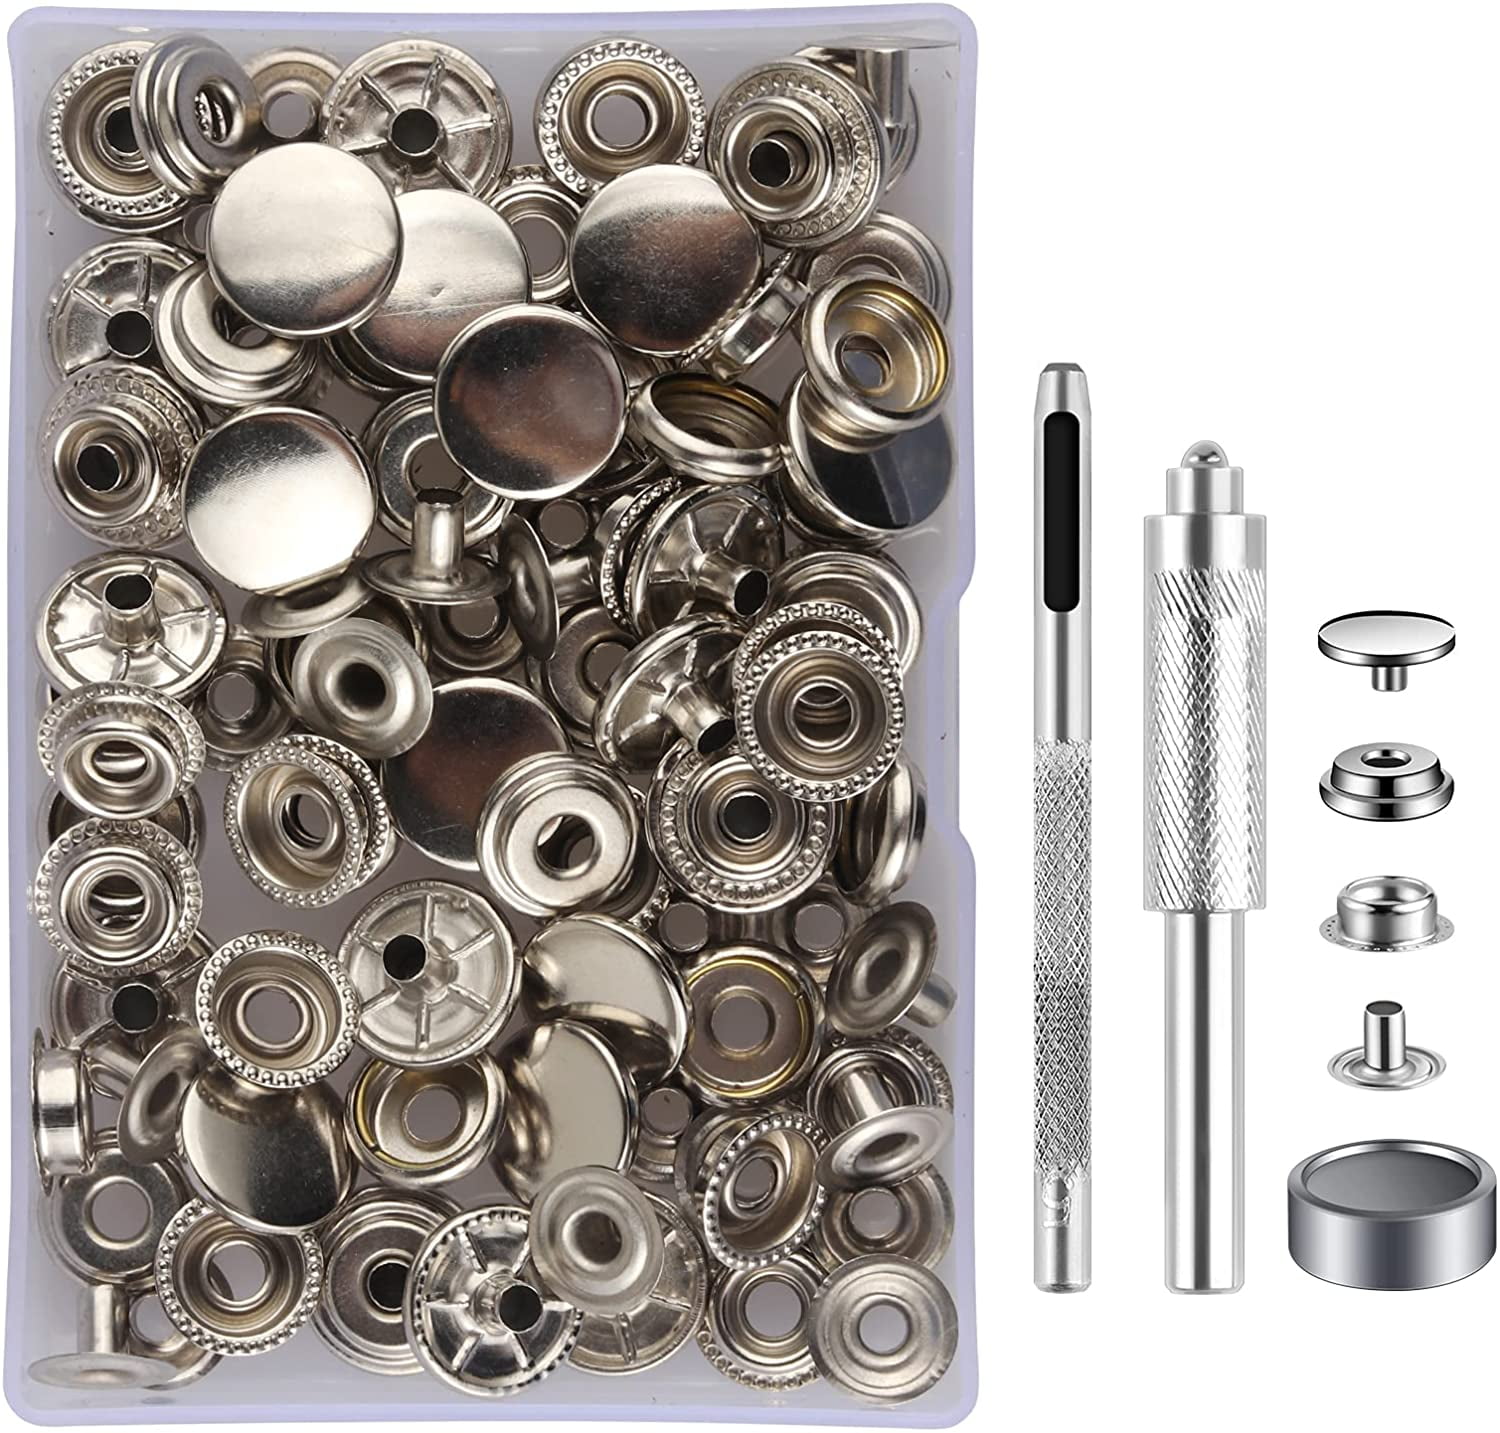 32 Sets Press Studs Cap Button, Stainless Steel Snap Fasteners Kit